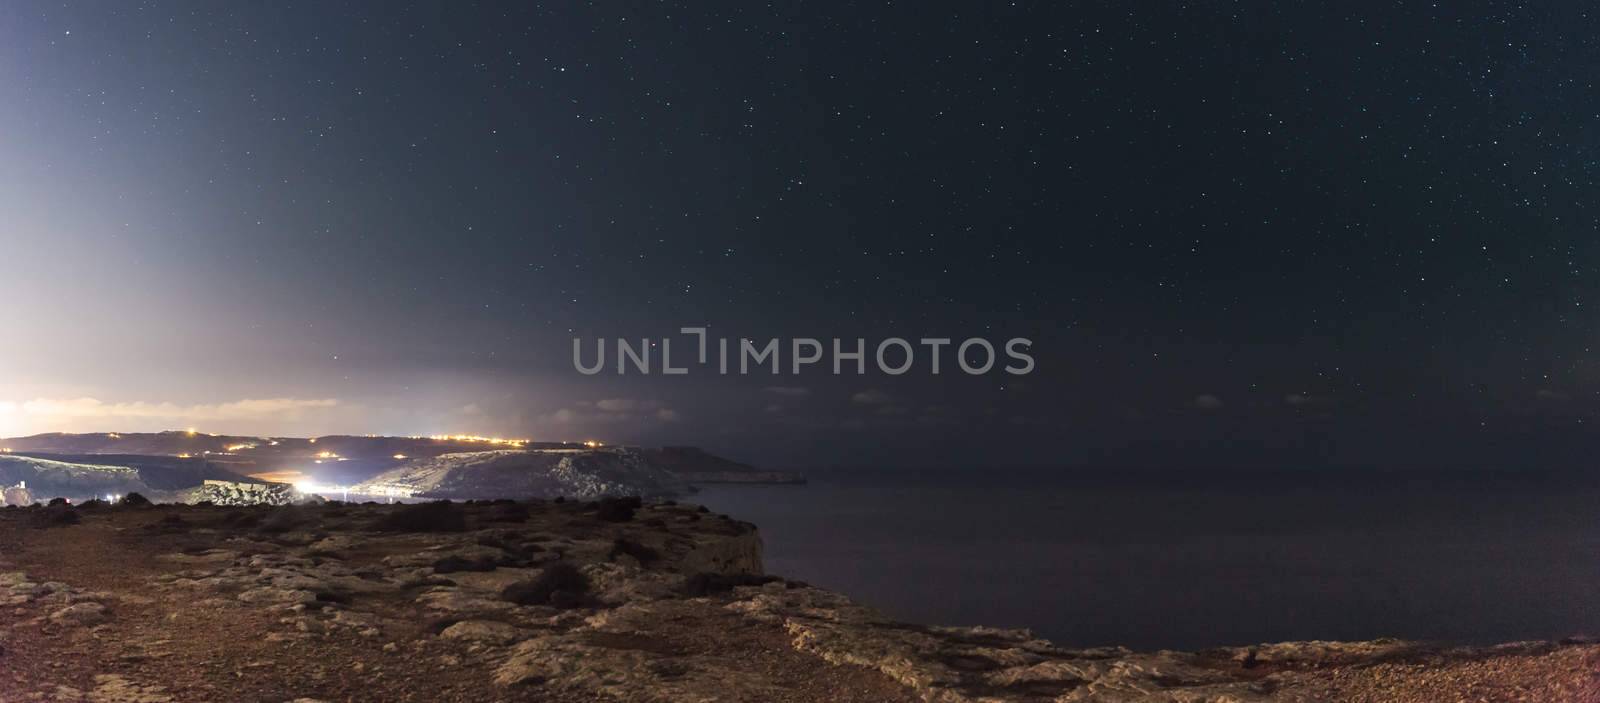 The beautiful night sky as seen from Majjistral Point in Malta